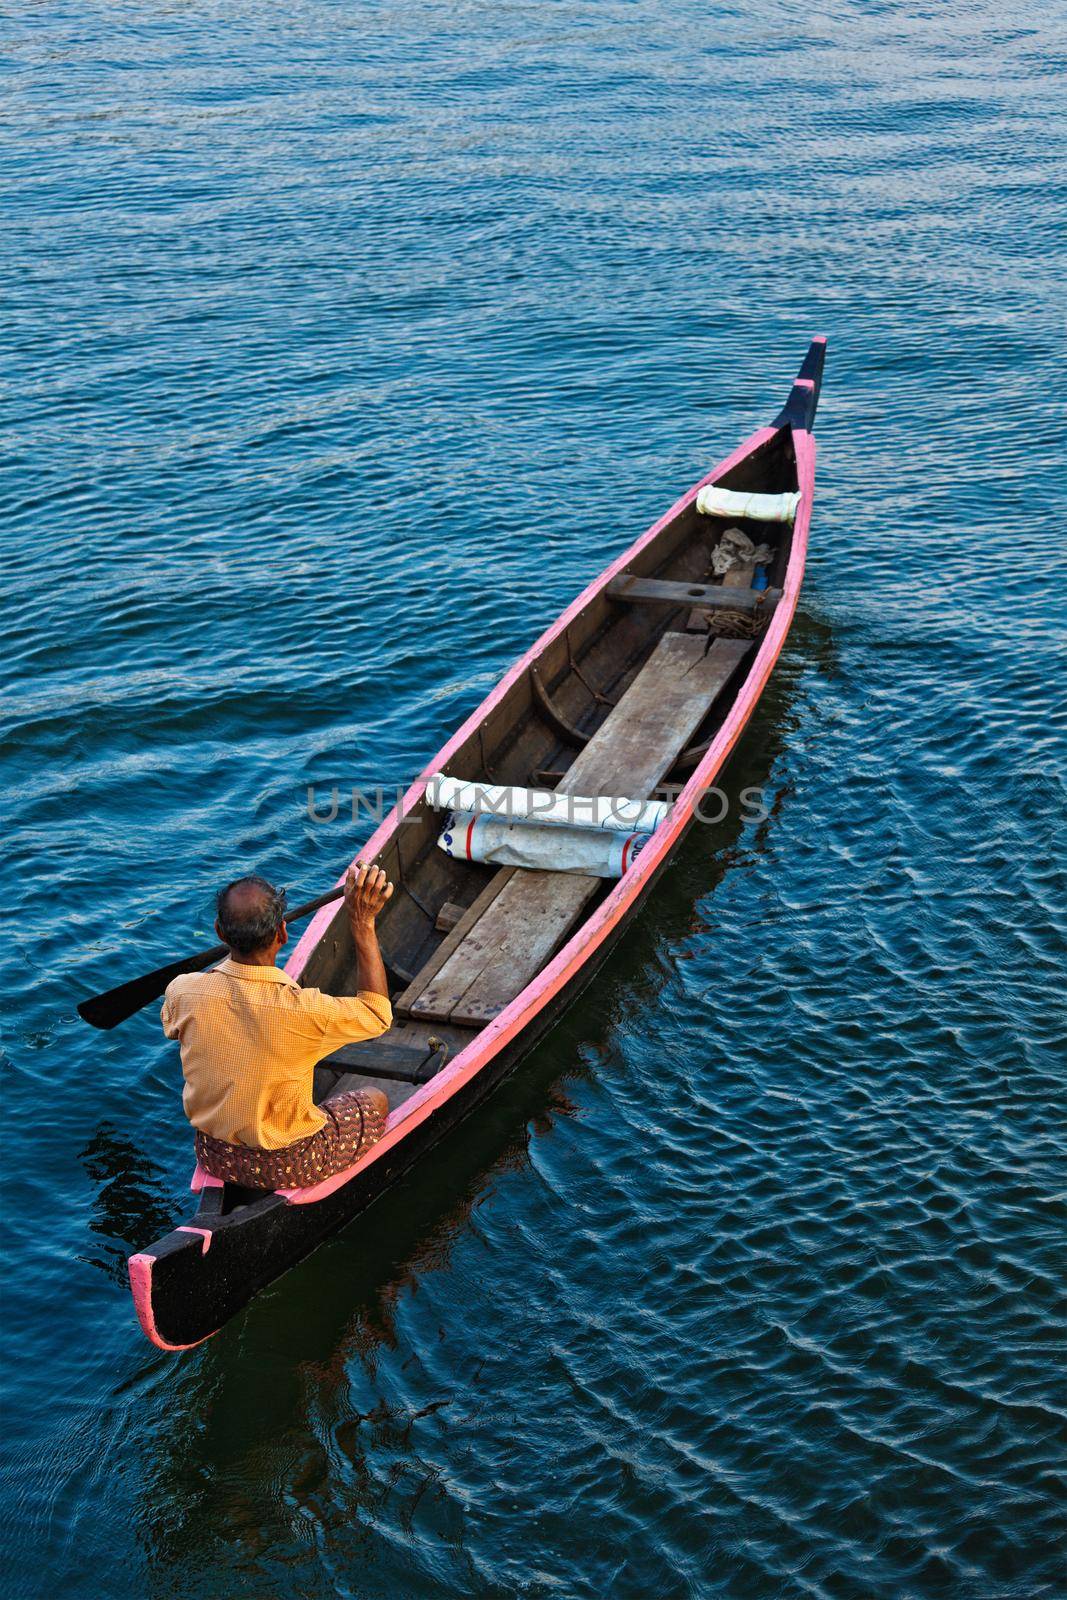 KERALA, INDIA - MAY 5, 2010: Indian man in small canoe boat in backwaters. Kerala backwaters are both major tourist attraction and integral part of local people life in Kerala